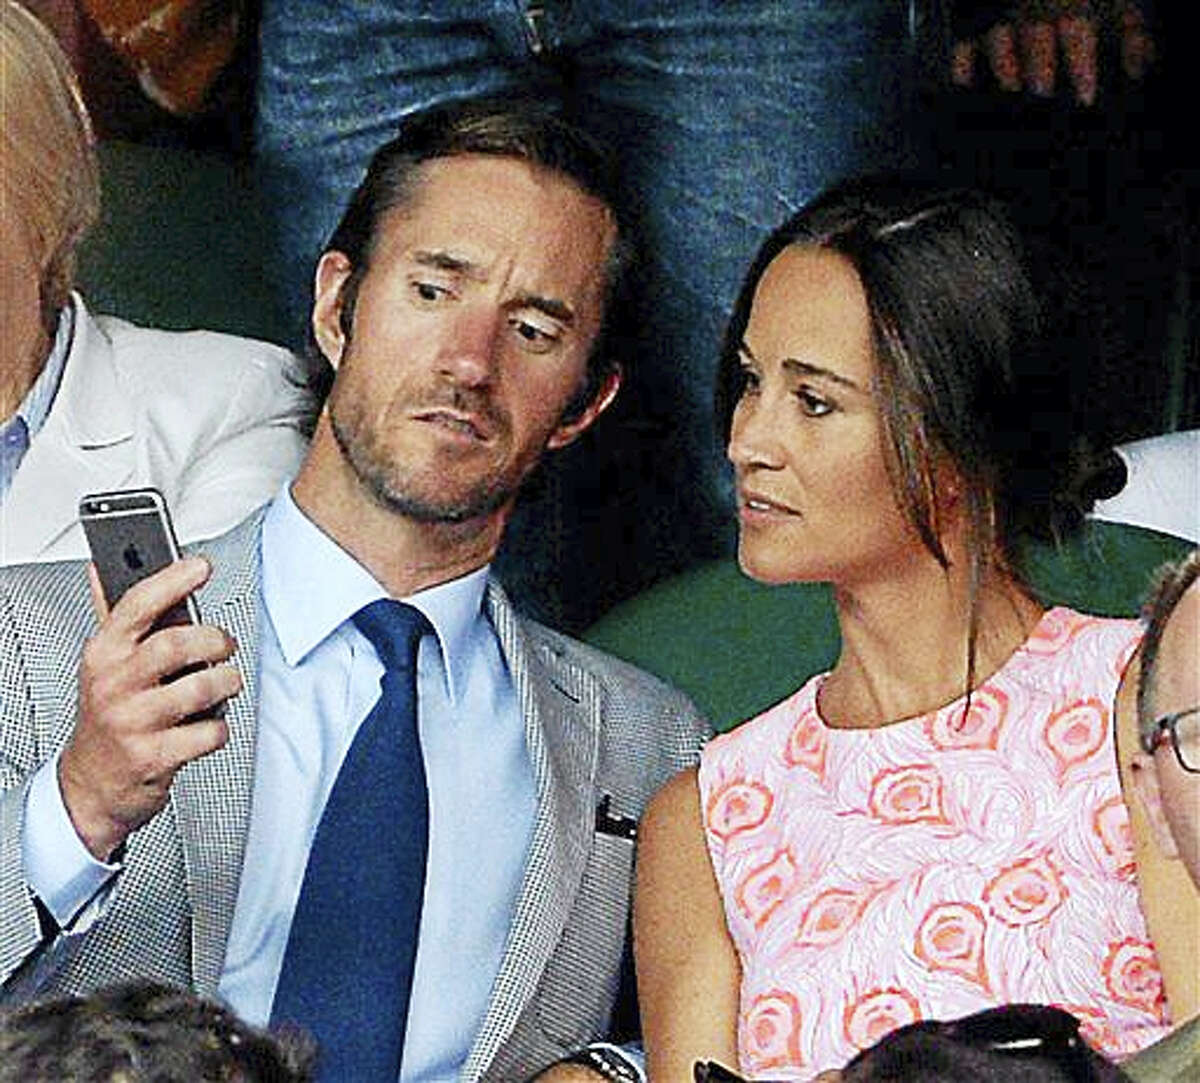 This is a July 6, 2016, file photo of Pippa Middleton and James Matthews on day nine of the Wimbledon Championships at the All England Lawn Tennis and Croquet Club, Wimbledon London. Pippa Middleton and fund manager James Matthews on Tuesday July 19, 2016 announced their engagement.